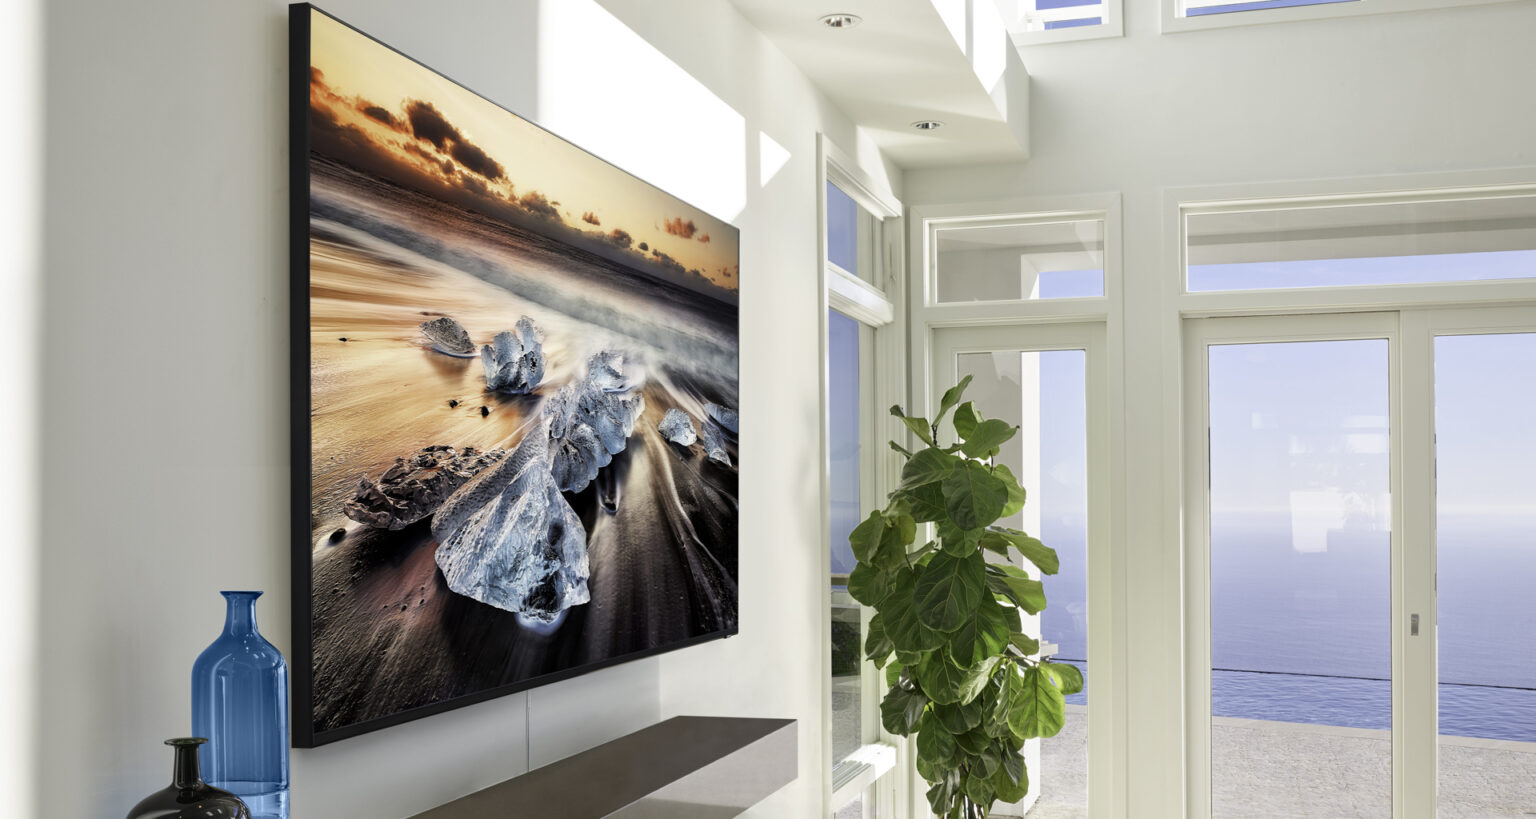 In the U.S. market, Samsung holds a commanding share of the smart TV pie. Image: Samsung.